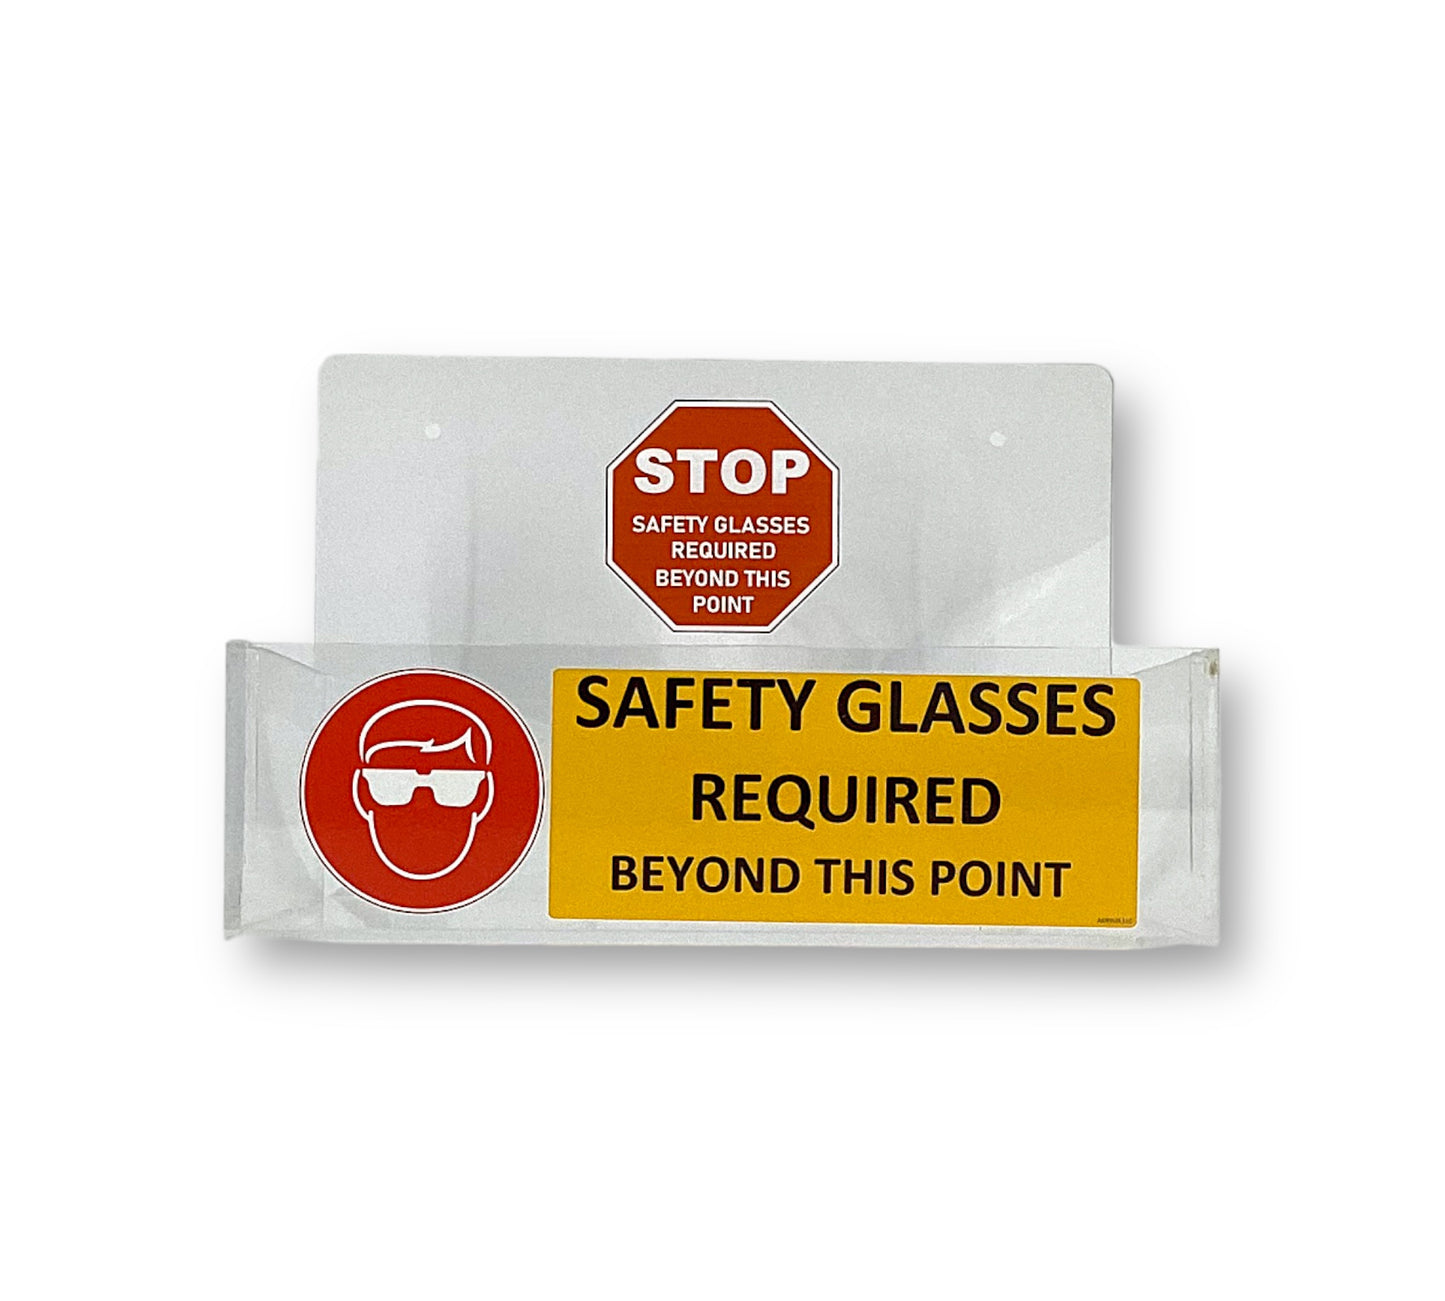 Open Clear Acrylic Wall Mountable Safety Glasses Dispenser - Red